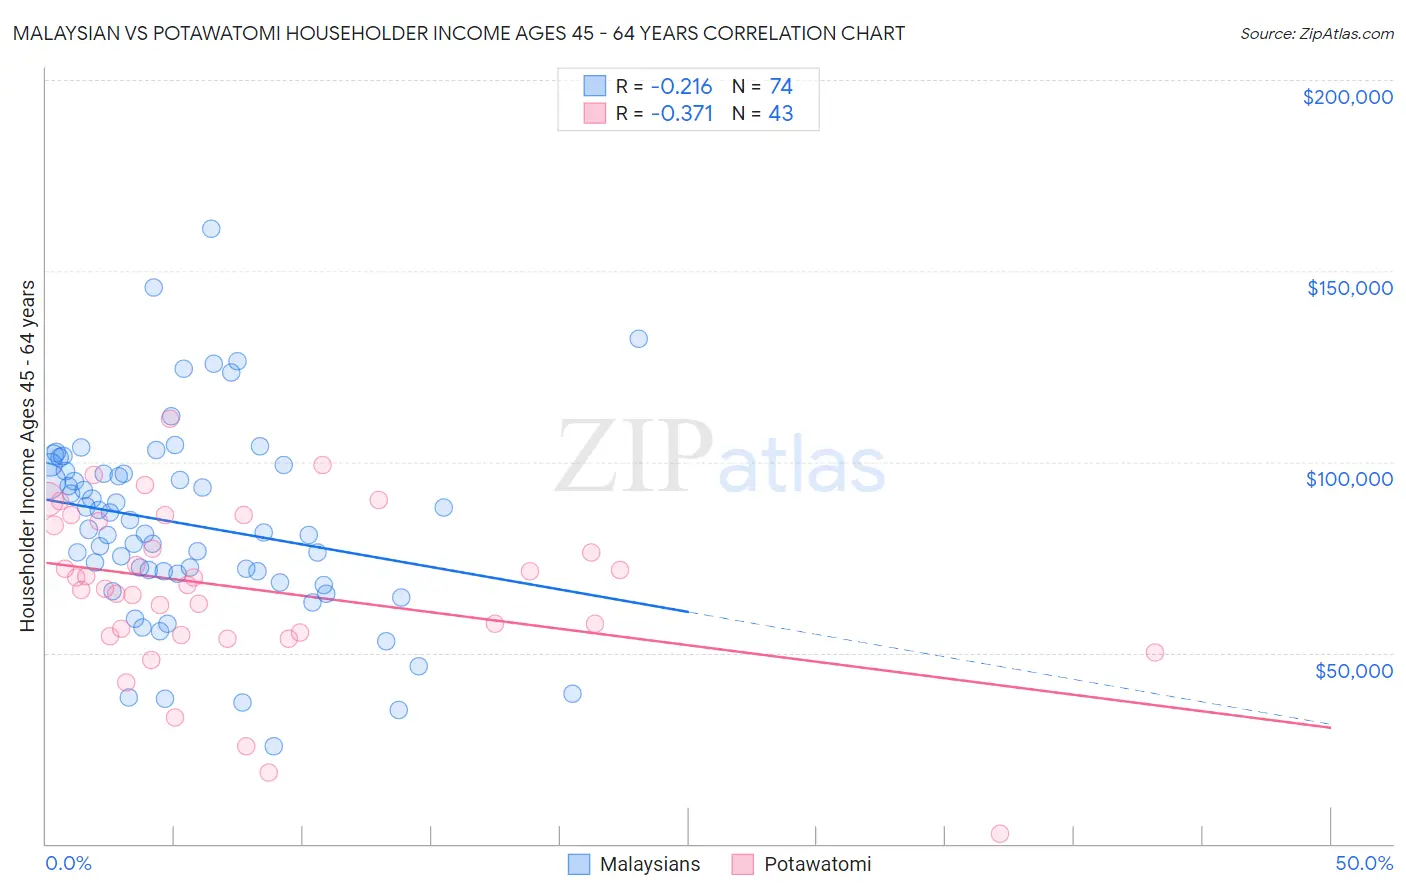 Malaysian vs Potawatomi Householder Income Ages 45 - 64 years